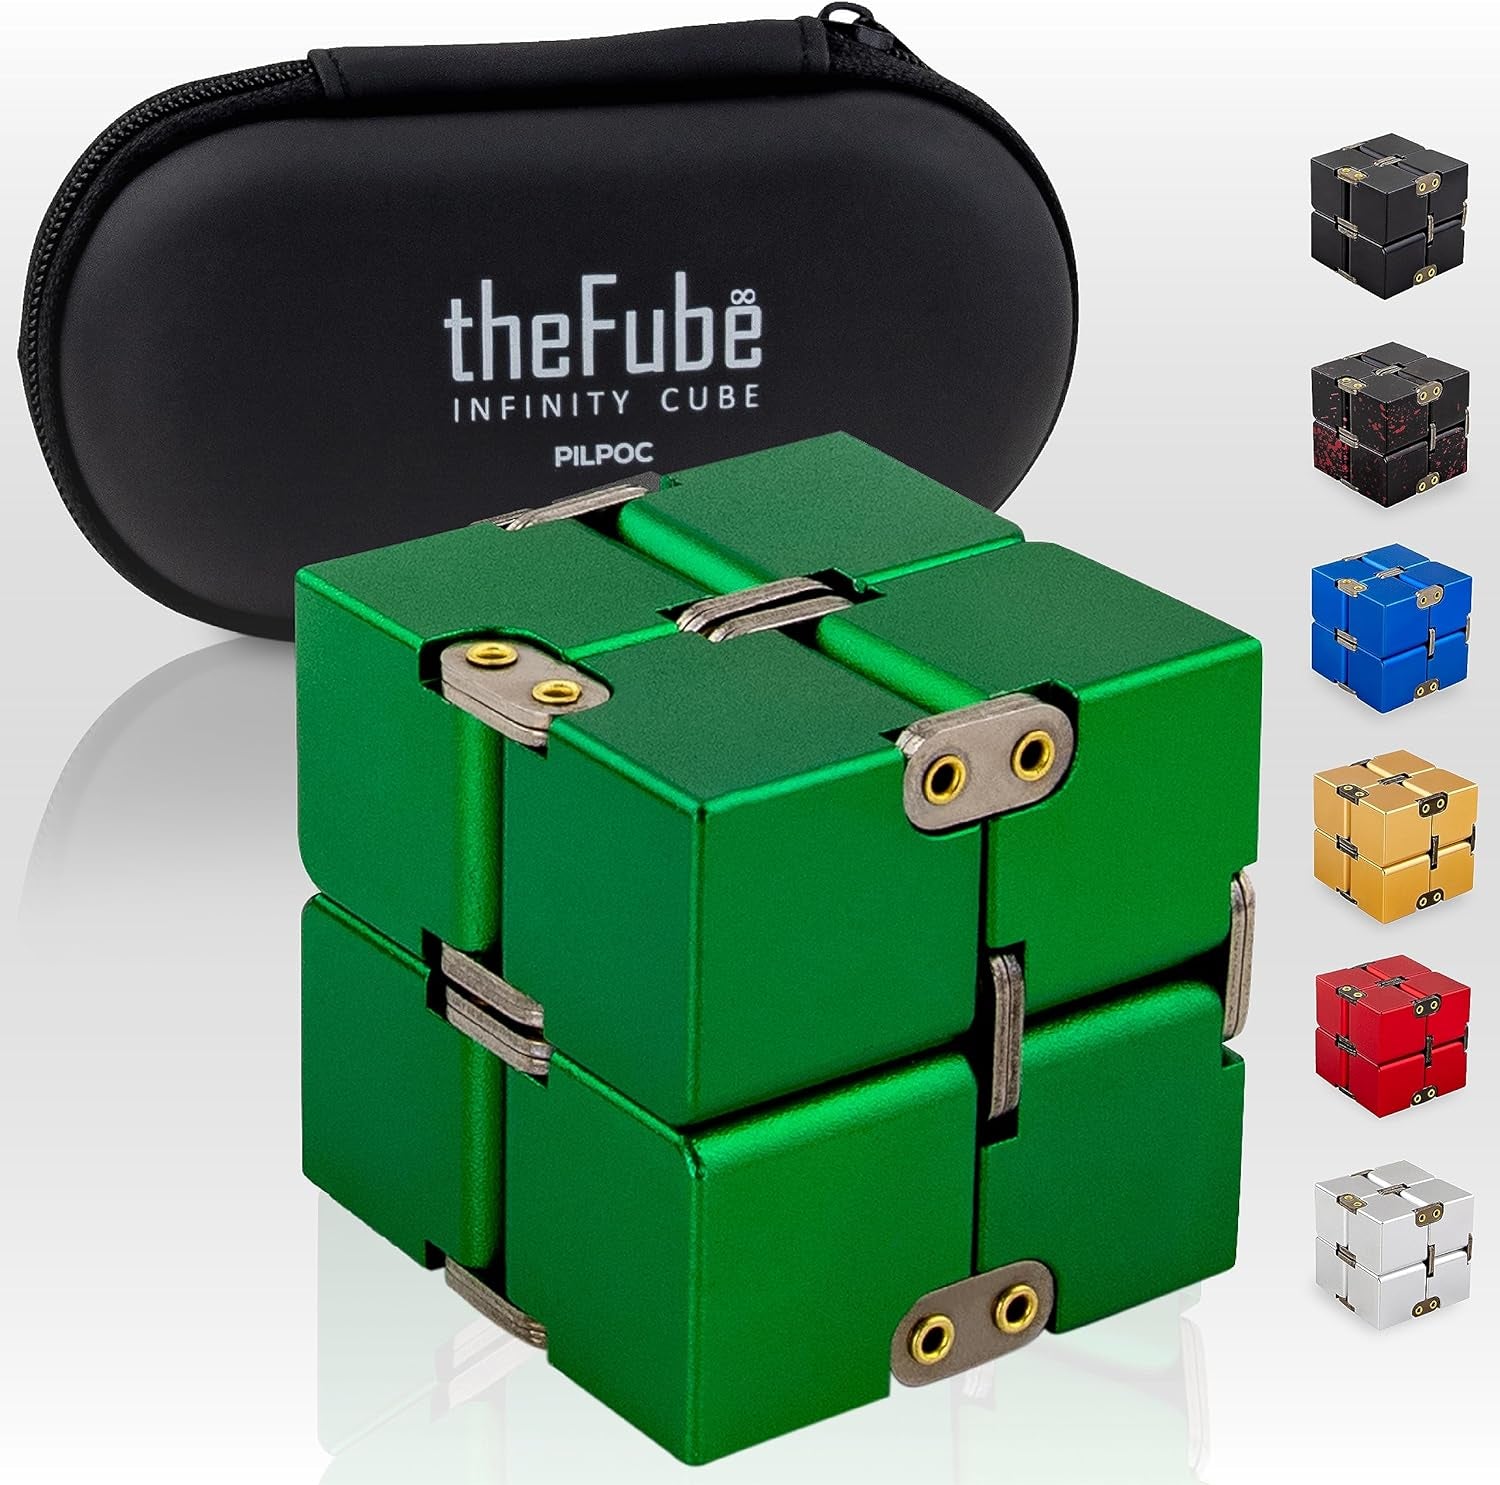 Thefube Infinity Cube Fidget Desk Toy - Aluminum Infinite Magic Cube with Case, Sturdy, Heavy, Relieve Stress and Anxiety, for ADD, ADHD, OCD (Green)